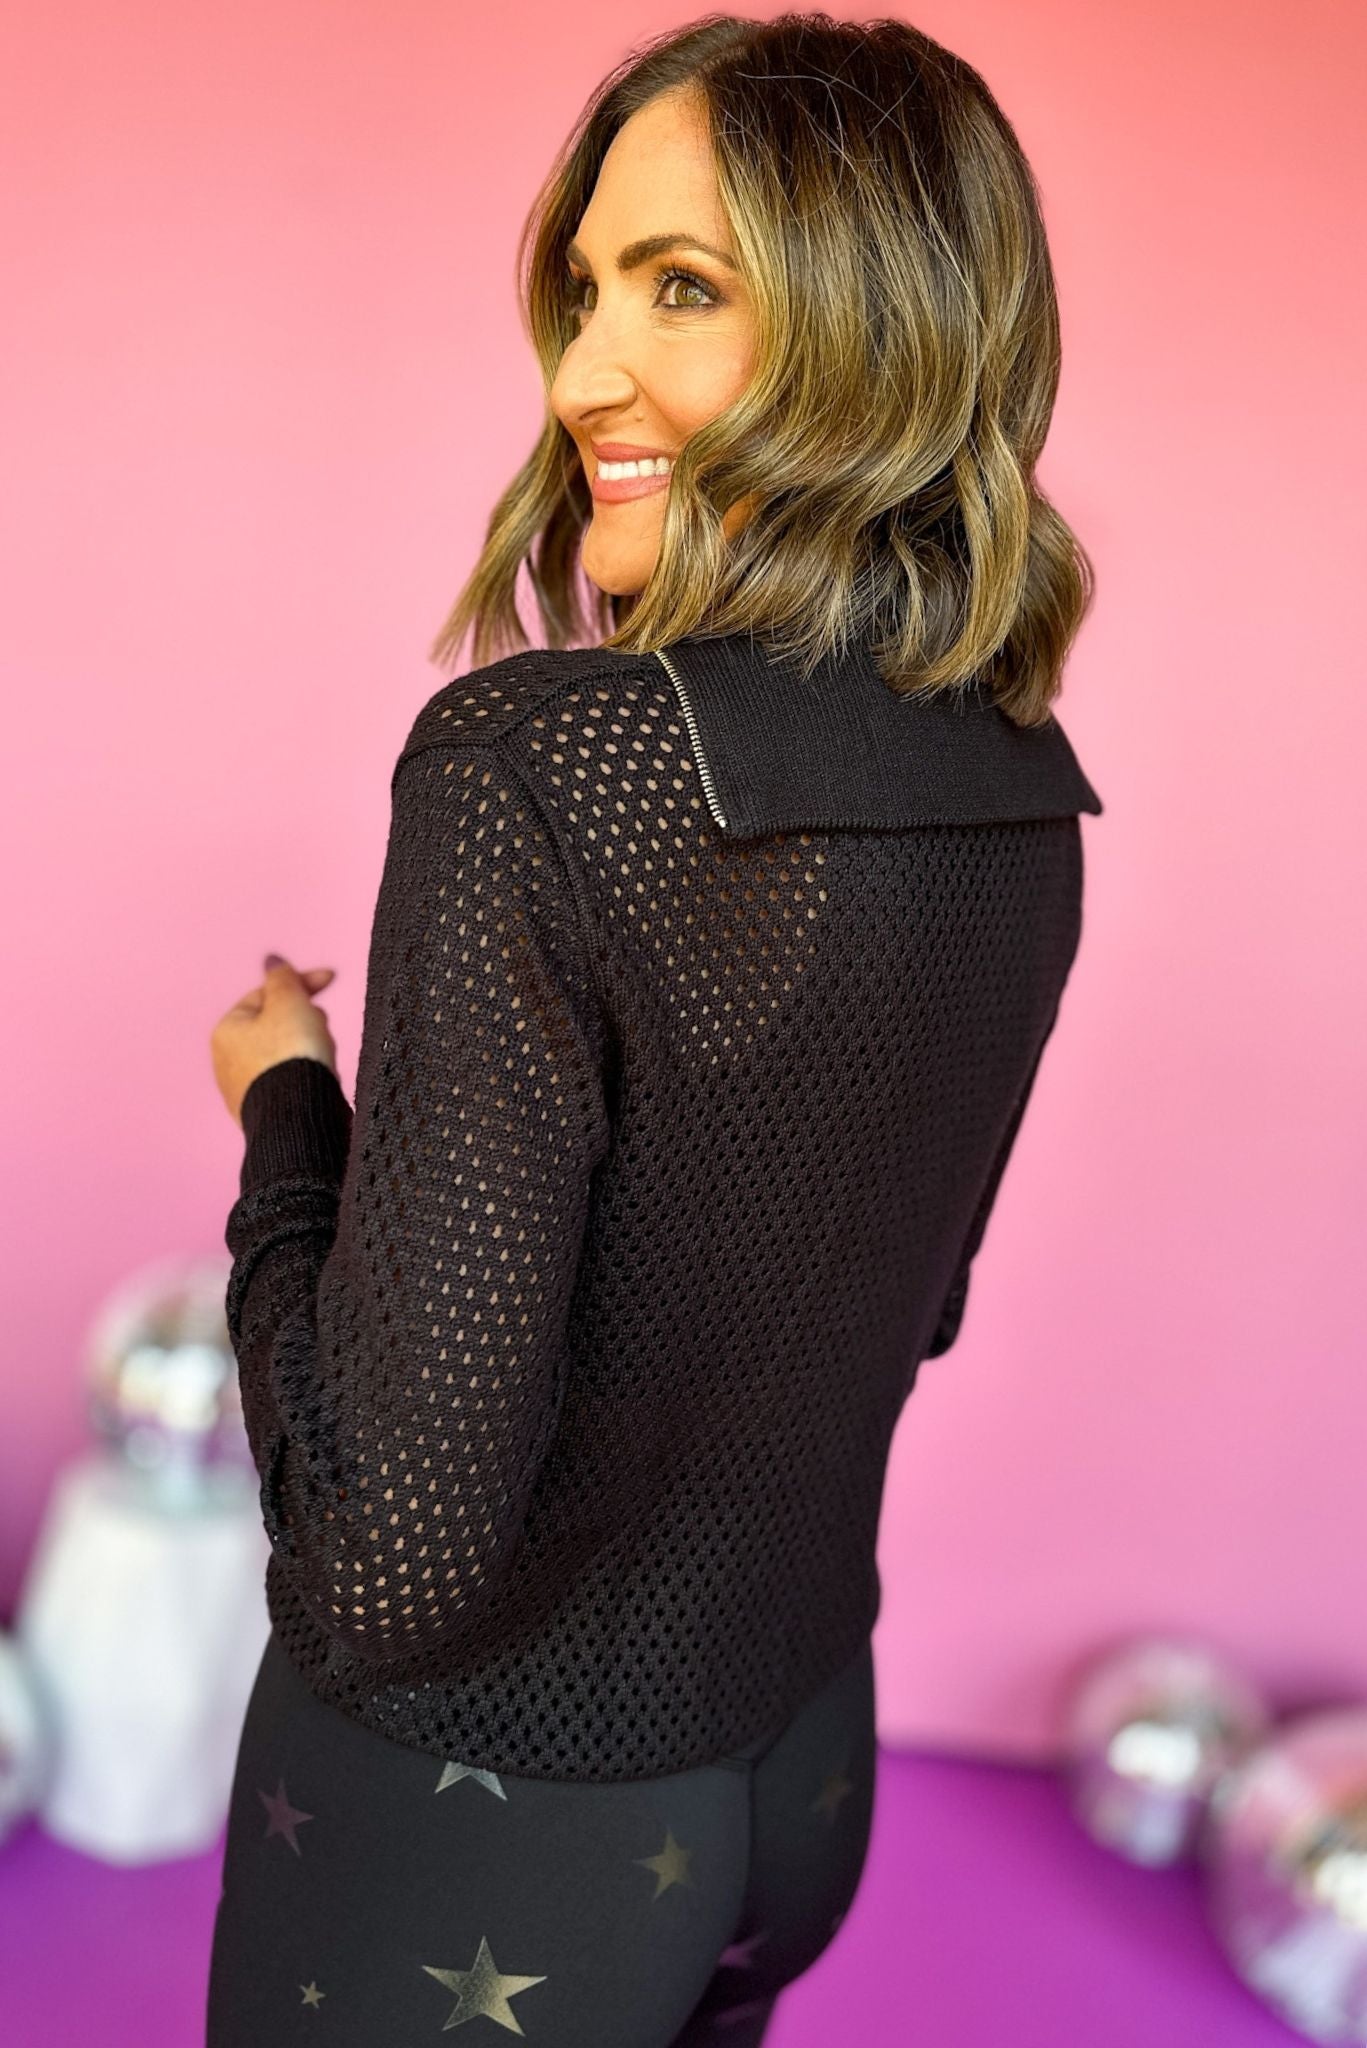 SSYS Black Crochet Zip Up Sweater, elevated style, elevated look, elevated jacket, athleisure jacket, must have jacket, must ahve style, fall athleisure, mom style, shop style your senses by mallory fitzsimmons